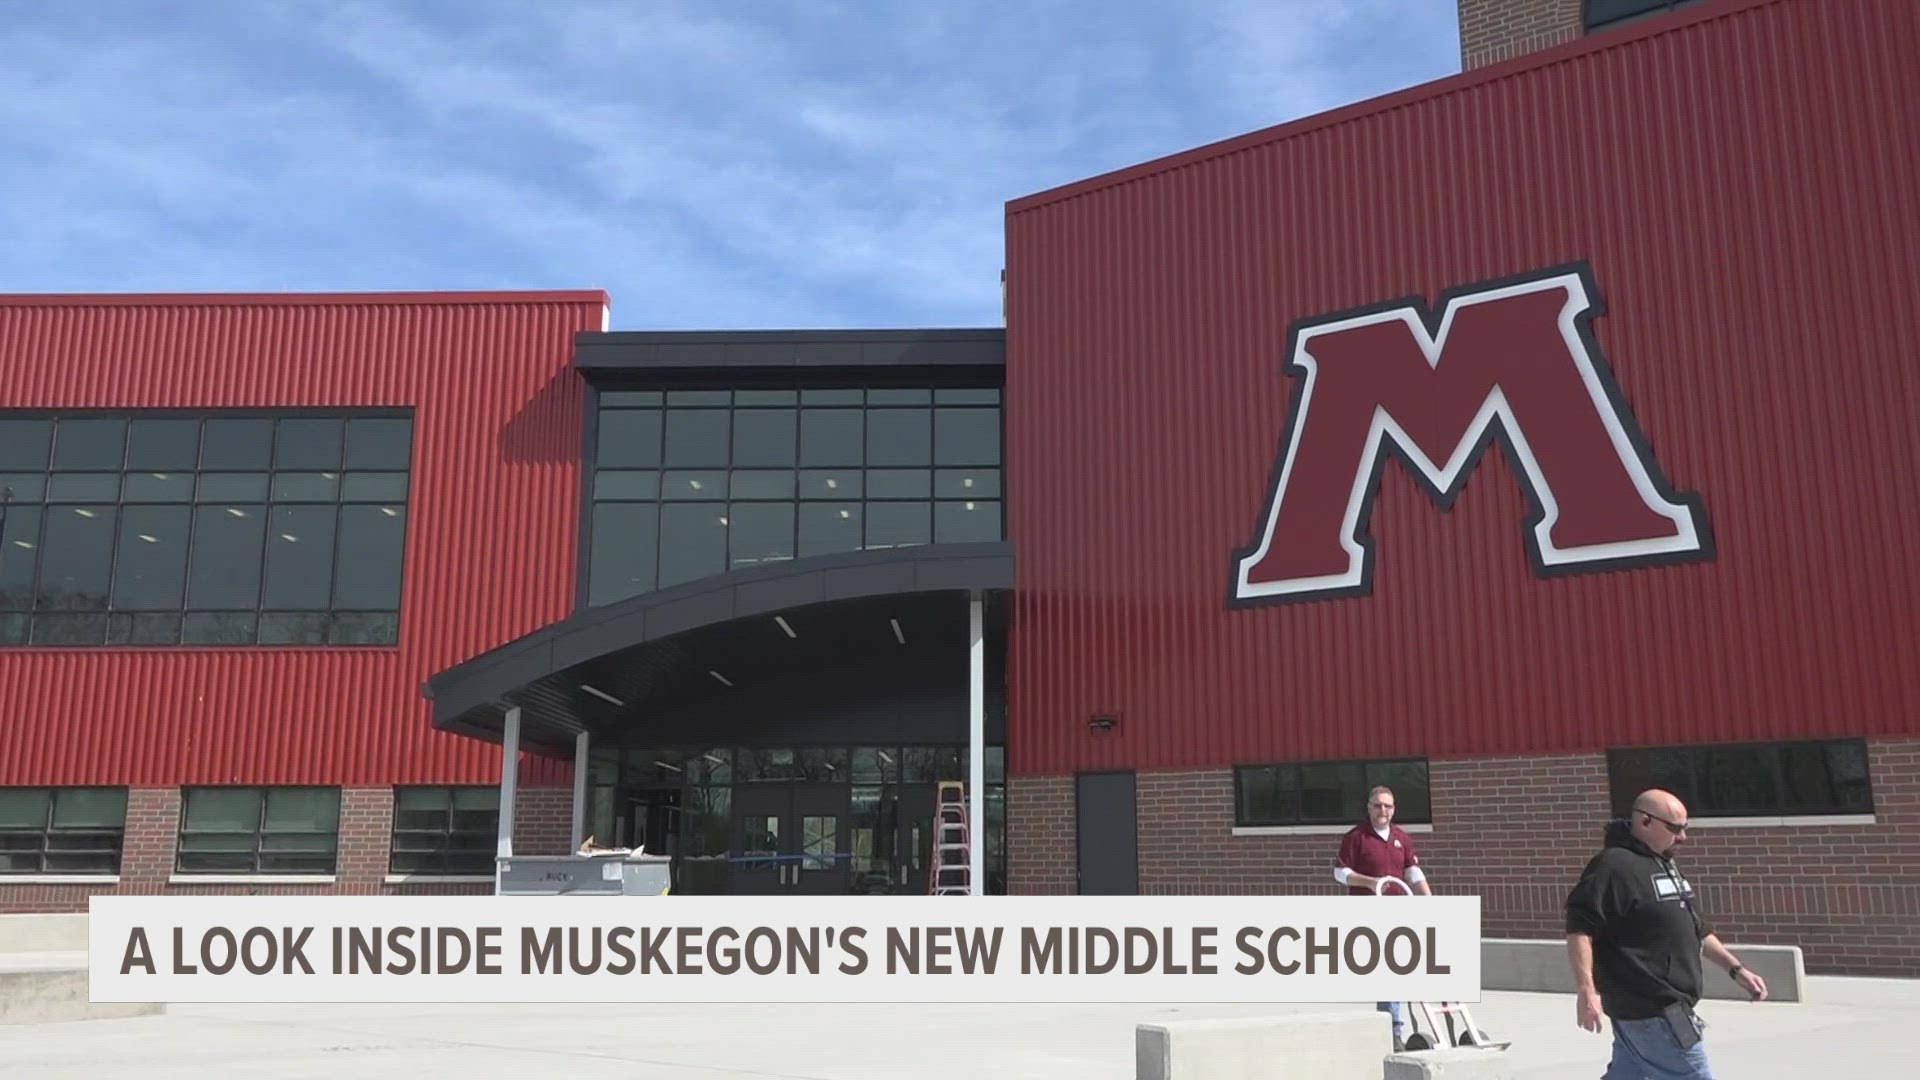 Charles Hackley Middle School is the Muskegon's first new school in nearly 70 years and it opens this fall.